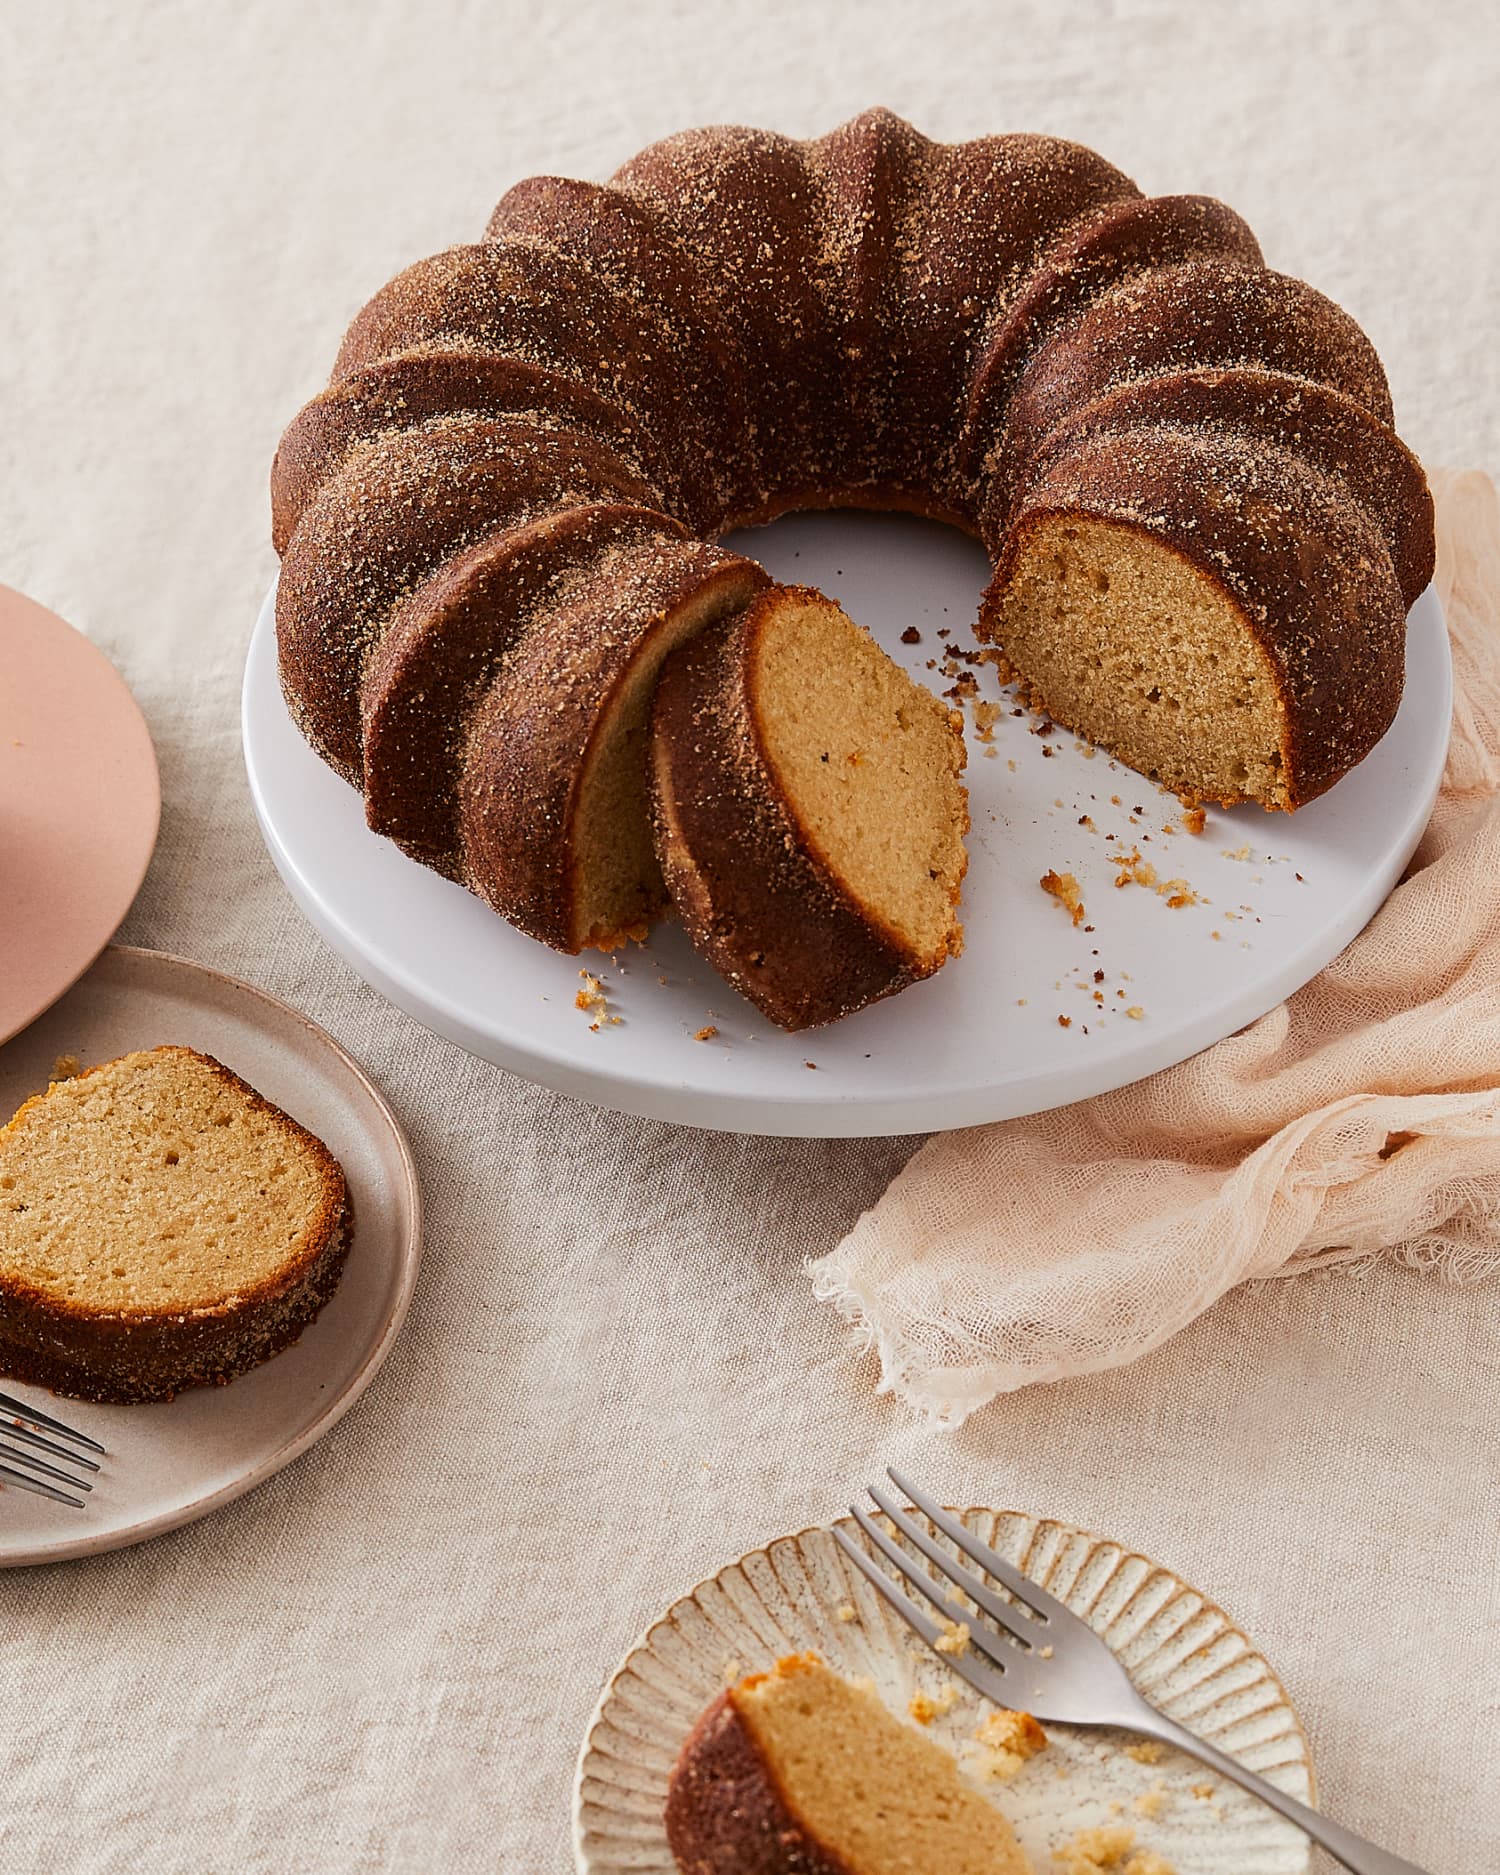 This Apple Cider Bundt Cake Is Essentially a Giant Doughnut